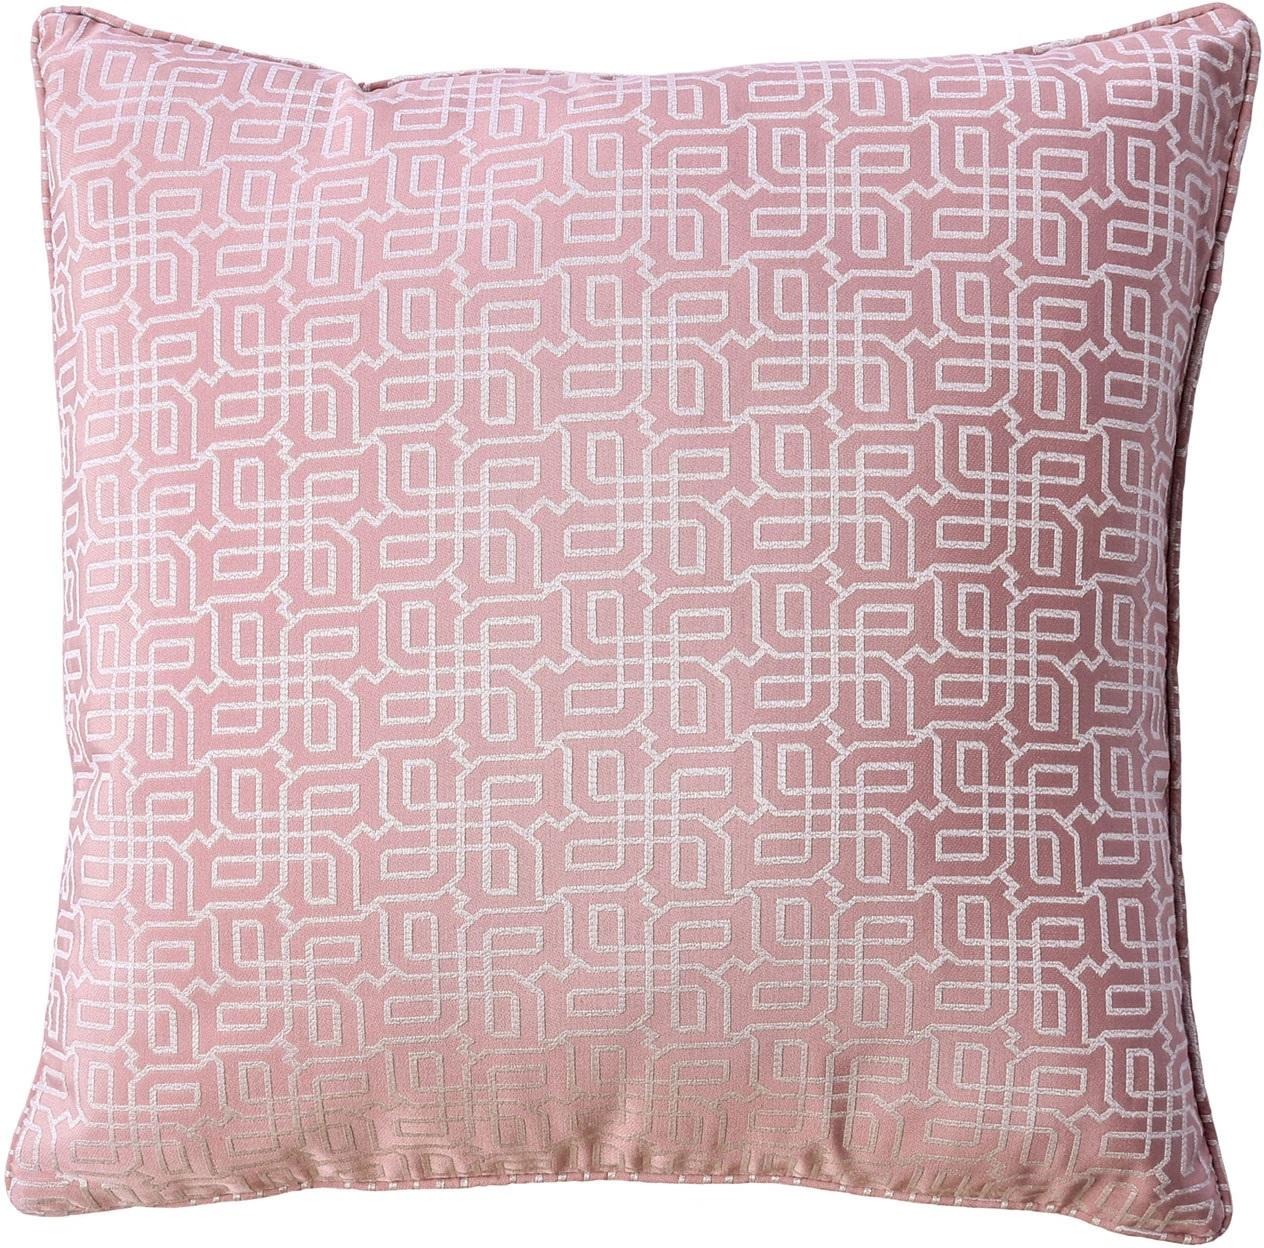 Contemporary Throw Pillow PL8004 Rose PL8004 in Pink 